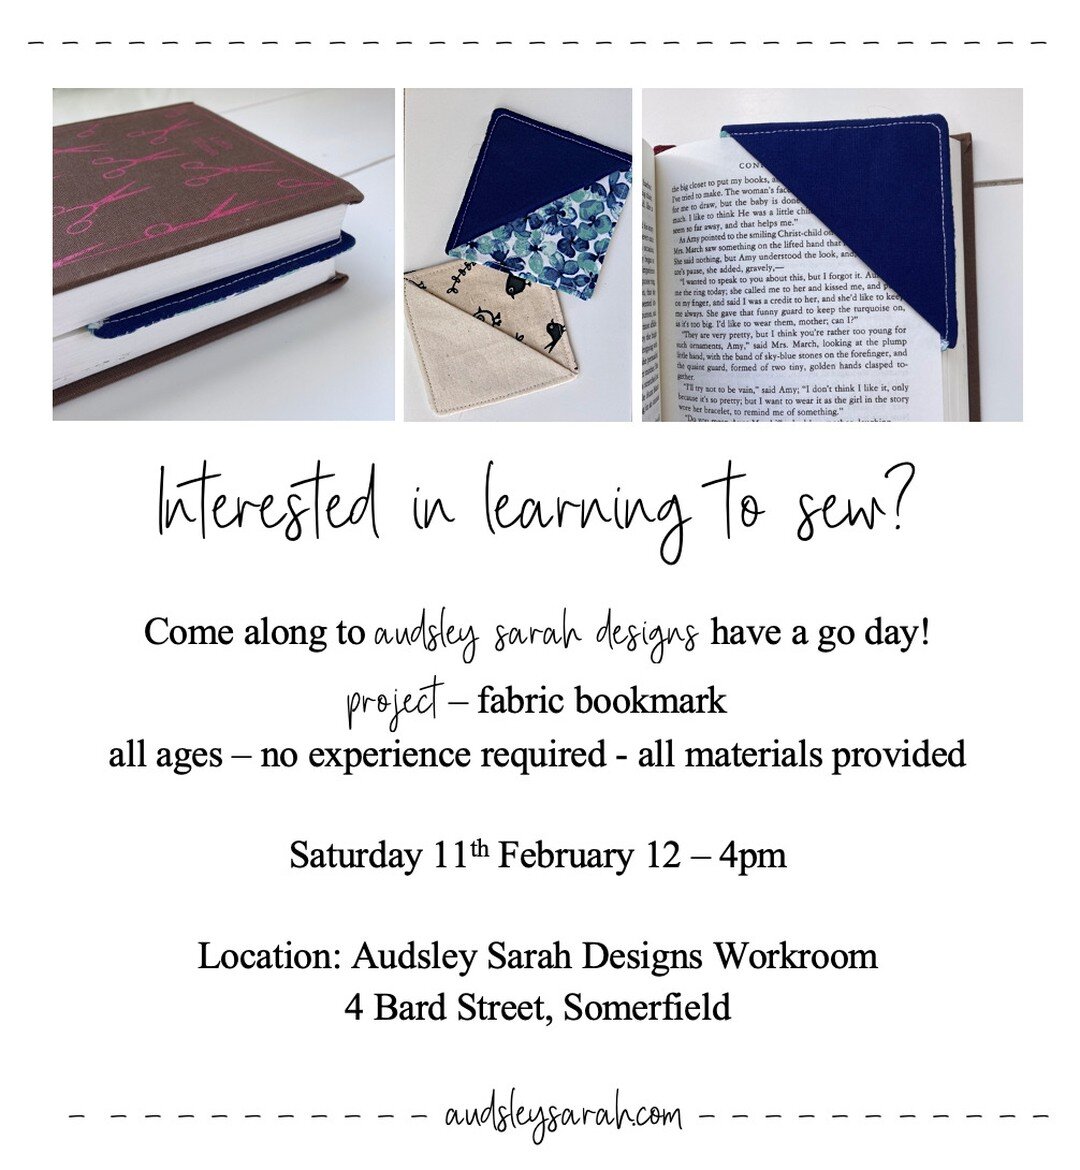 We have another &quot;have a go day&quot; this Saturday. Feel free to drop in anytime between 12 - 4pm. A great way to give sewing a go, have all materials provided and walk away with a cute fabric bookmark!

#sewnz #chchsews #sewchch #sewingschool #